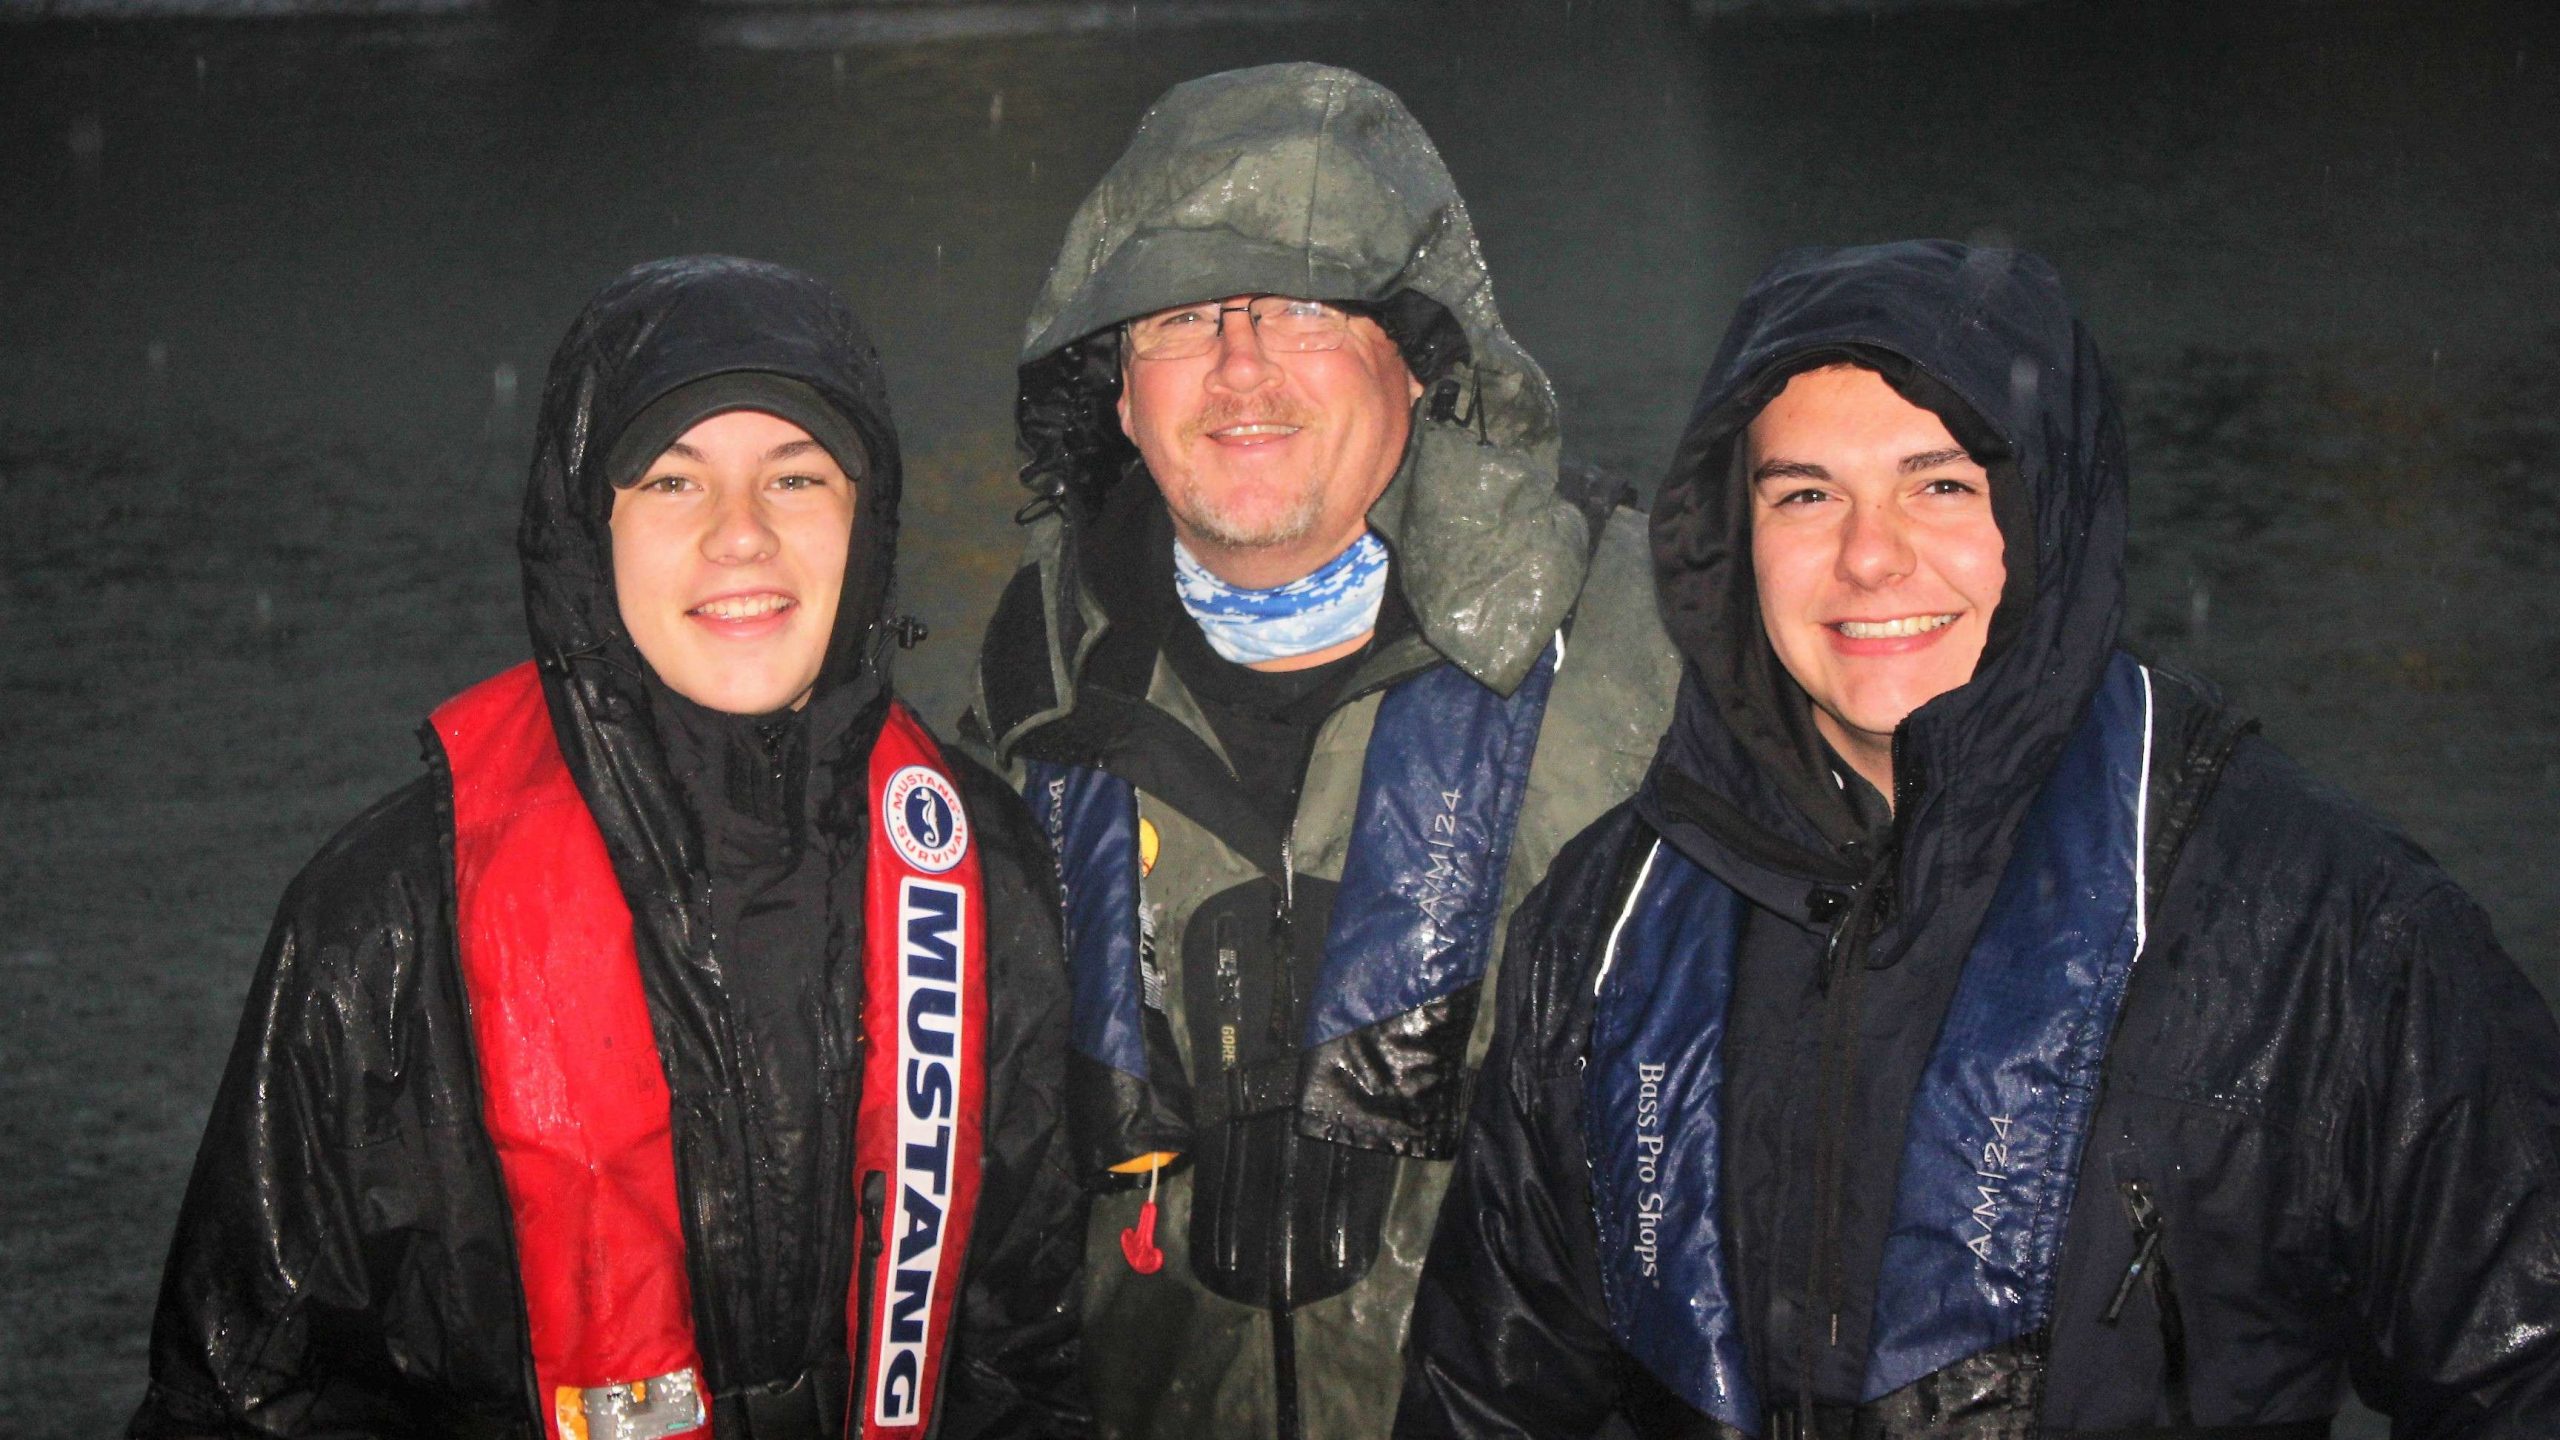 All smiles despite the rain beginning to really come down. This is the team of Mason Mitchell, left, and Logan Bailey of Oklahoma. Captain Bruce Collins is at middle.